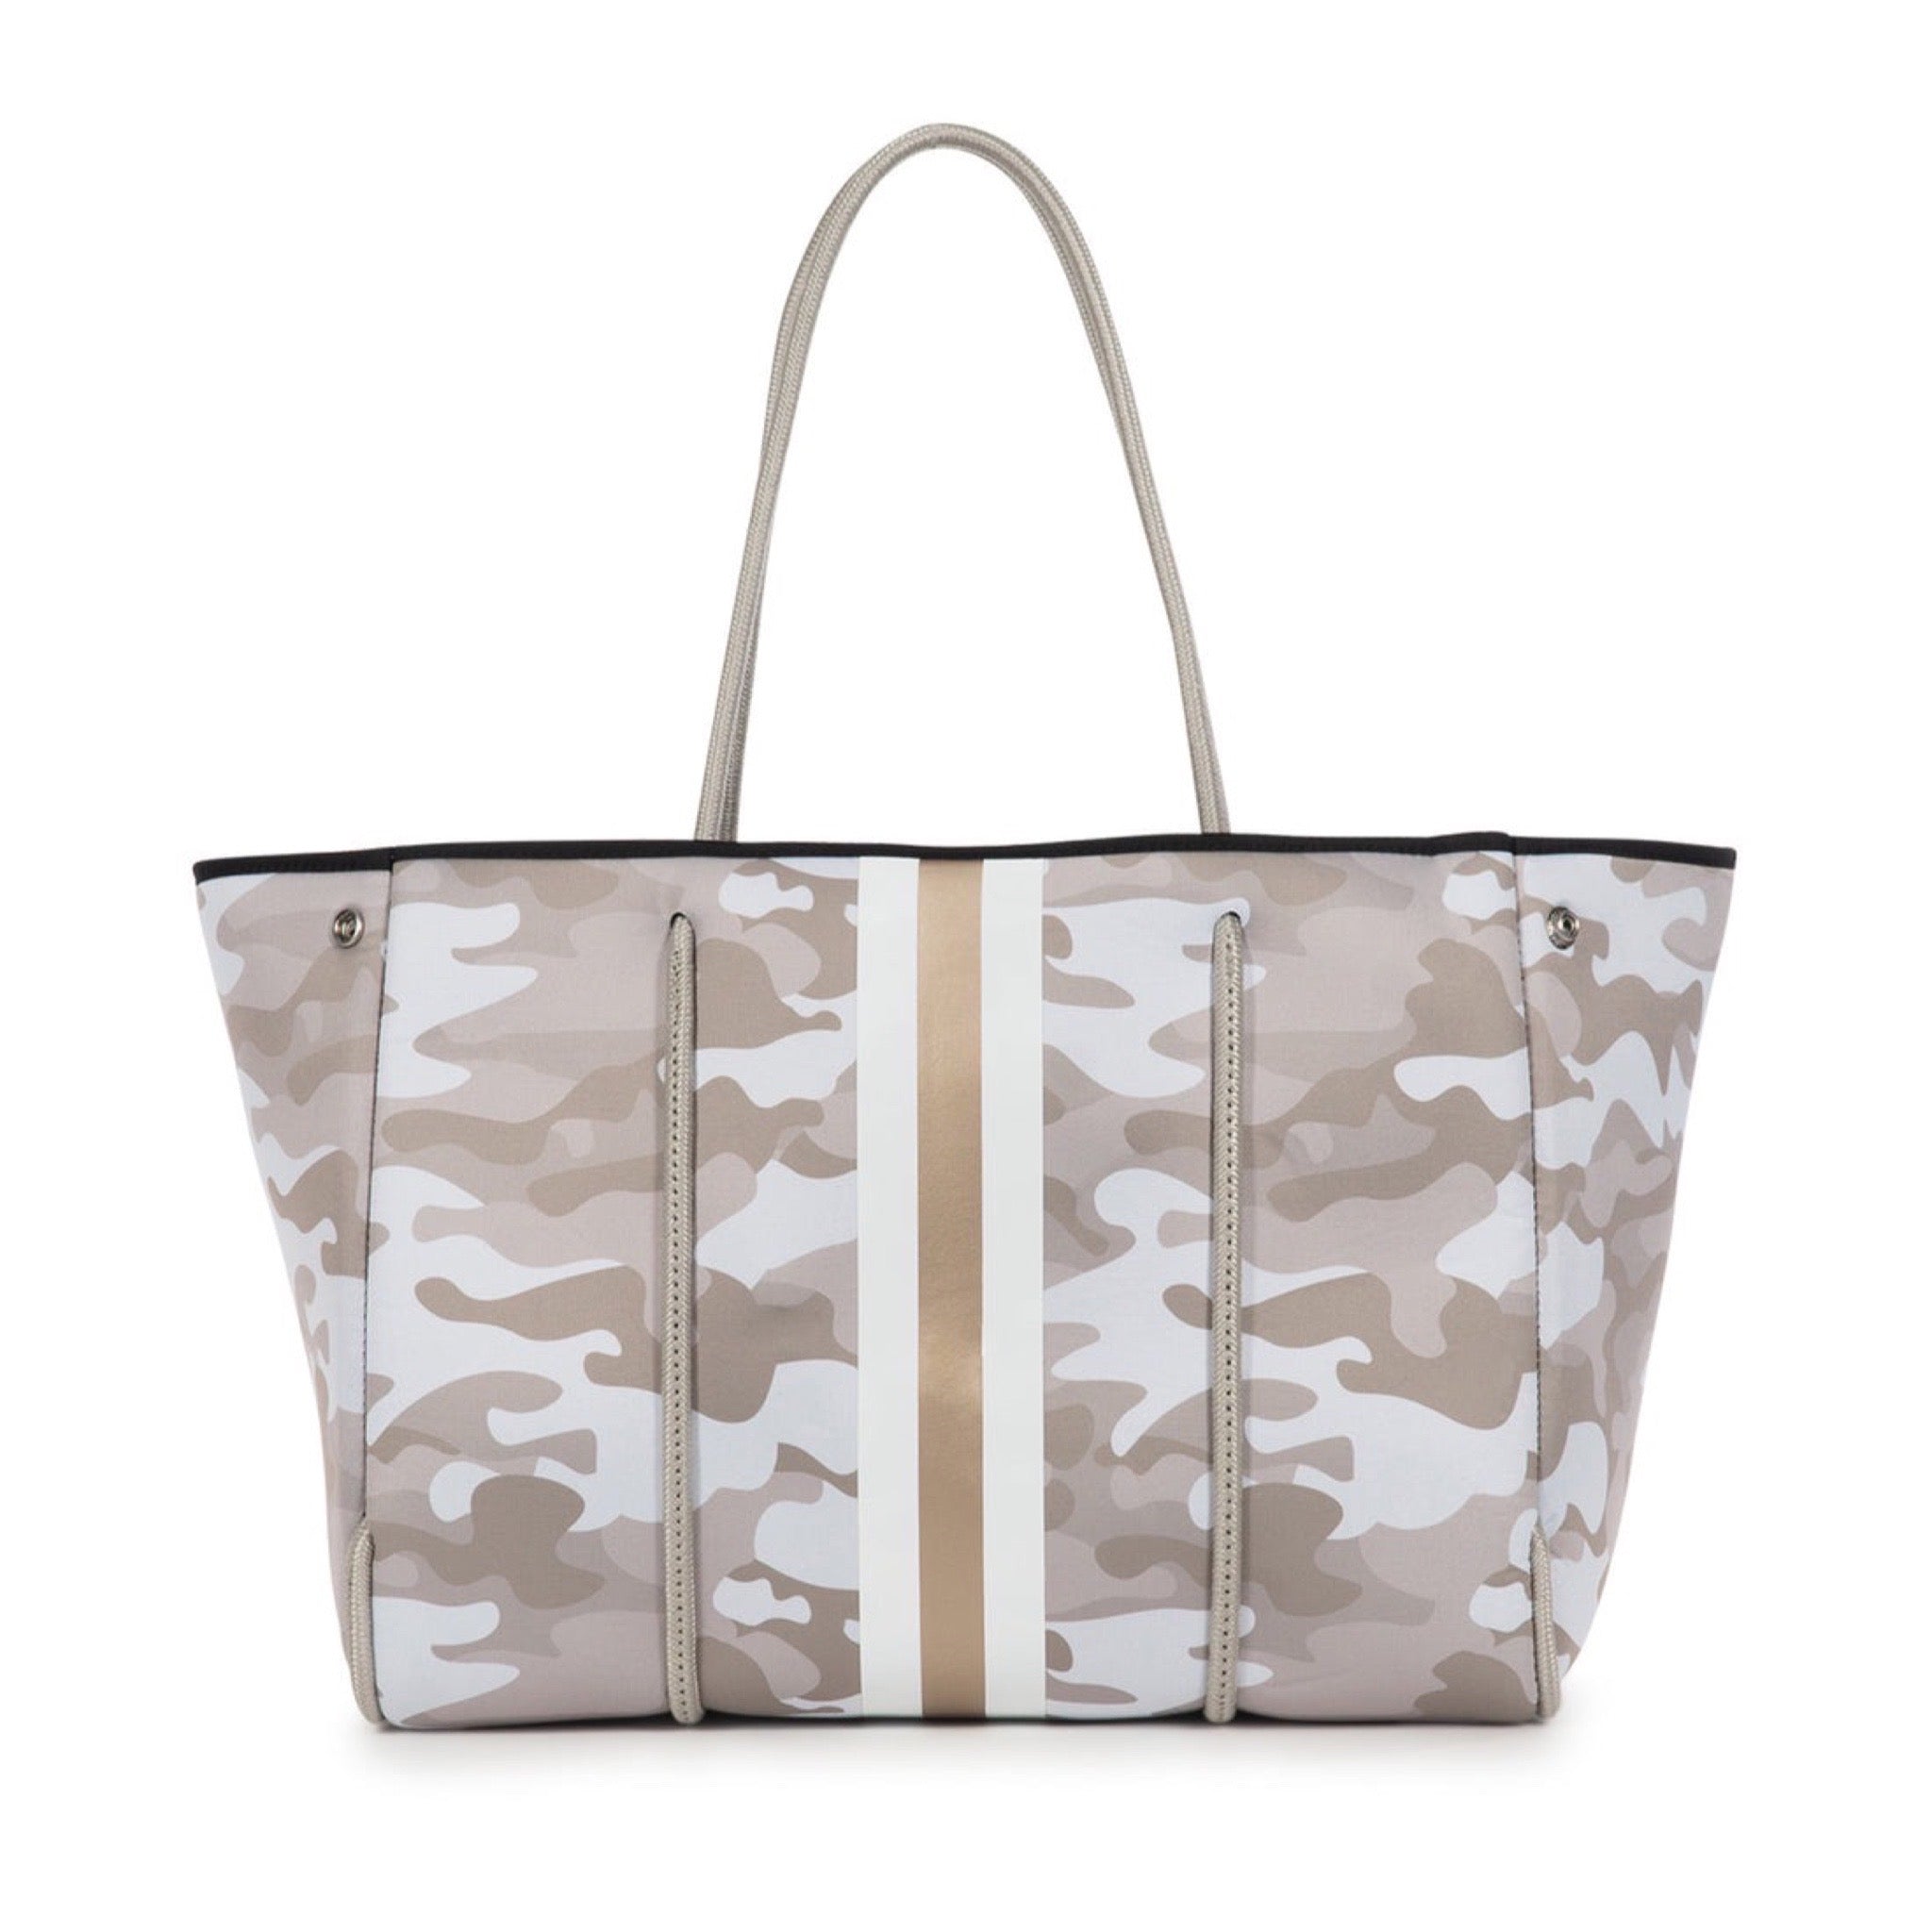 Haute Shore Greyson Sahara Camo Tote Bag available at Shaylula Jewlery & Gifts in Tarrytown, NY and online. The Greyson is our favorite everyday tote. Designed to last, this neoprene tote is the perfect blend of luxury, style and functionality to take on the go! Think of it as the funky, vegan, little sister to LV's Neverfull... It even includes a removable zipper pouch.  • Neoprene  • Bag - 18" W x  12" H x 10" D; Strap - 10.25"; Pouch - 8.5" W x 6" H